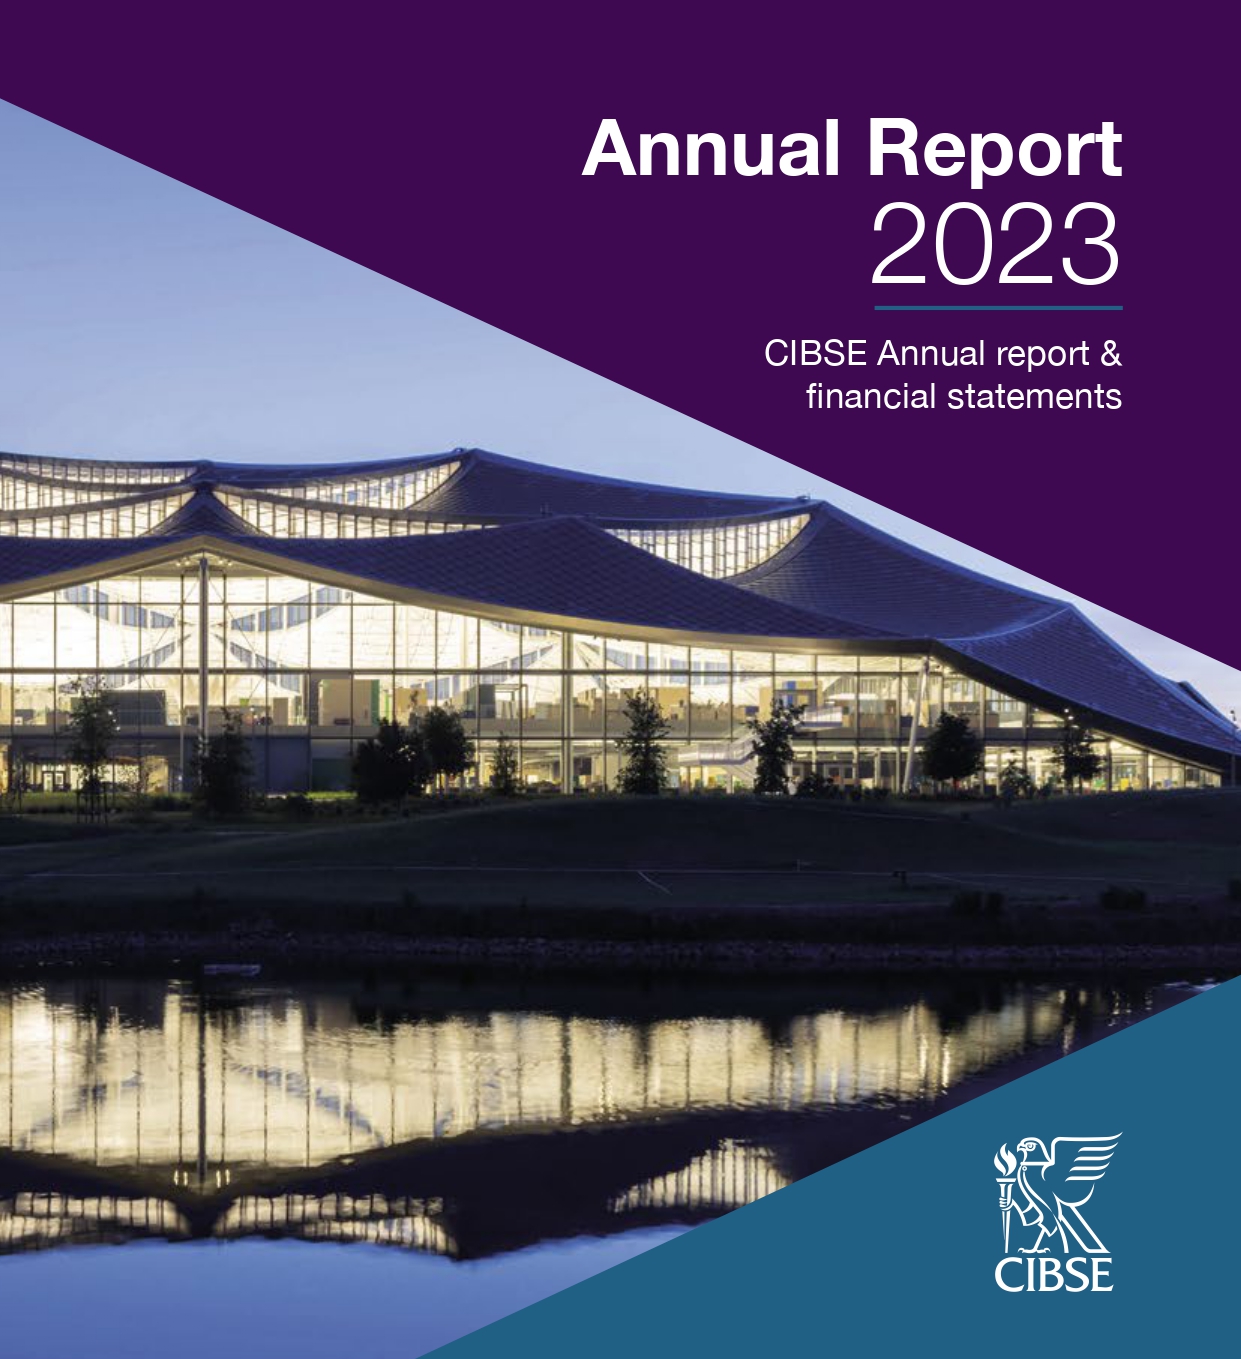 CIBSE Annual Report 2023